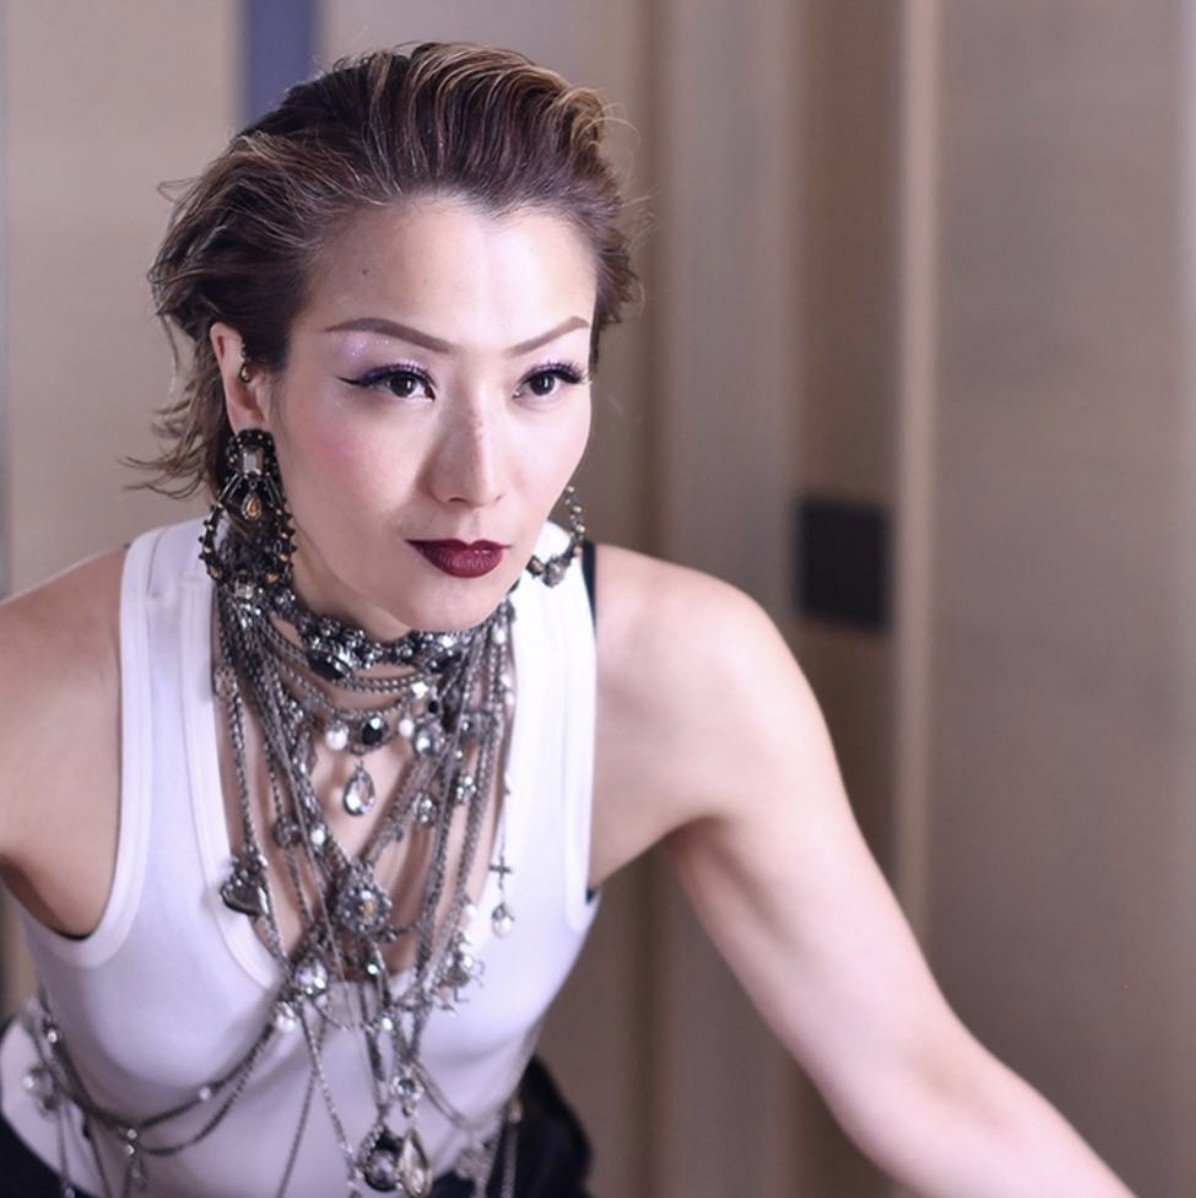 Hong Kong superstar Sammi Cheng is back with her #FOLLOWMi World Tour this July. Photo: Instagram